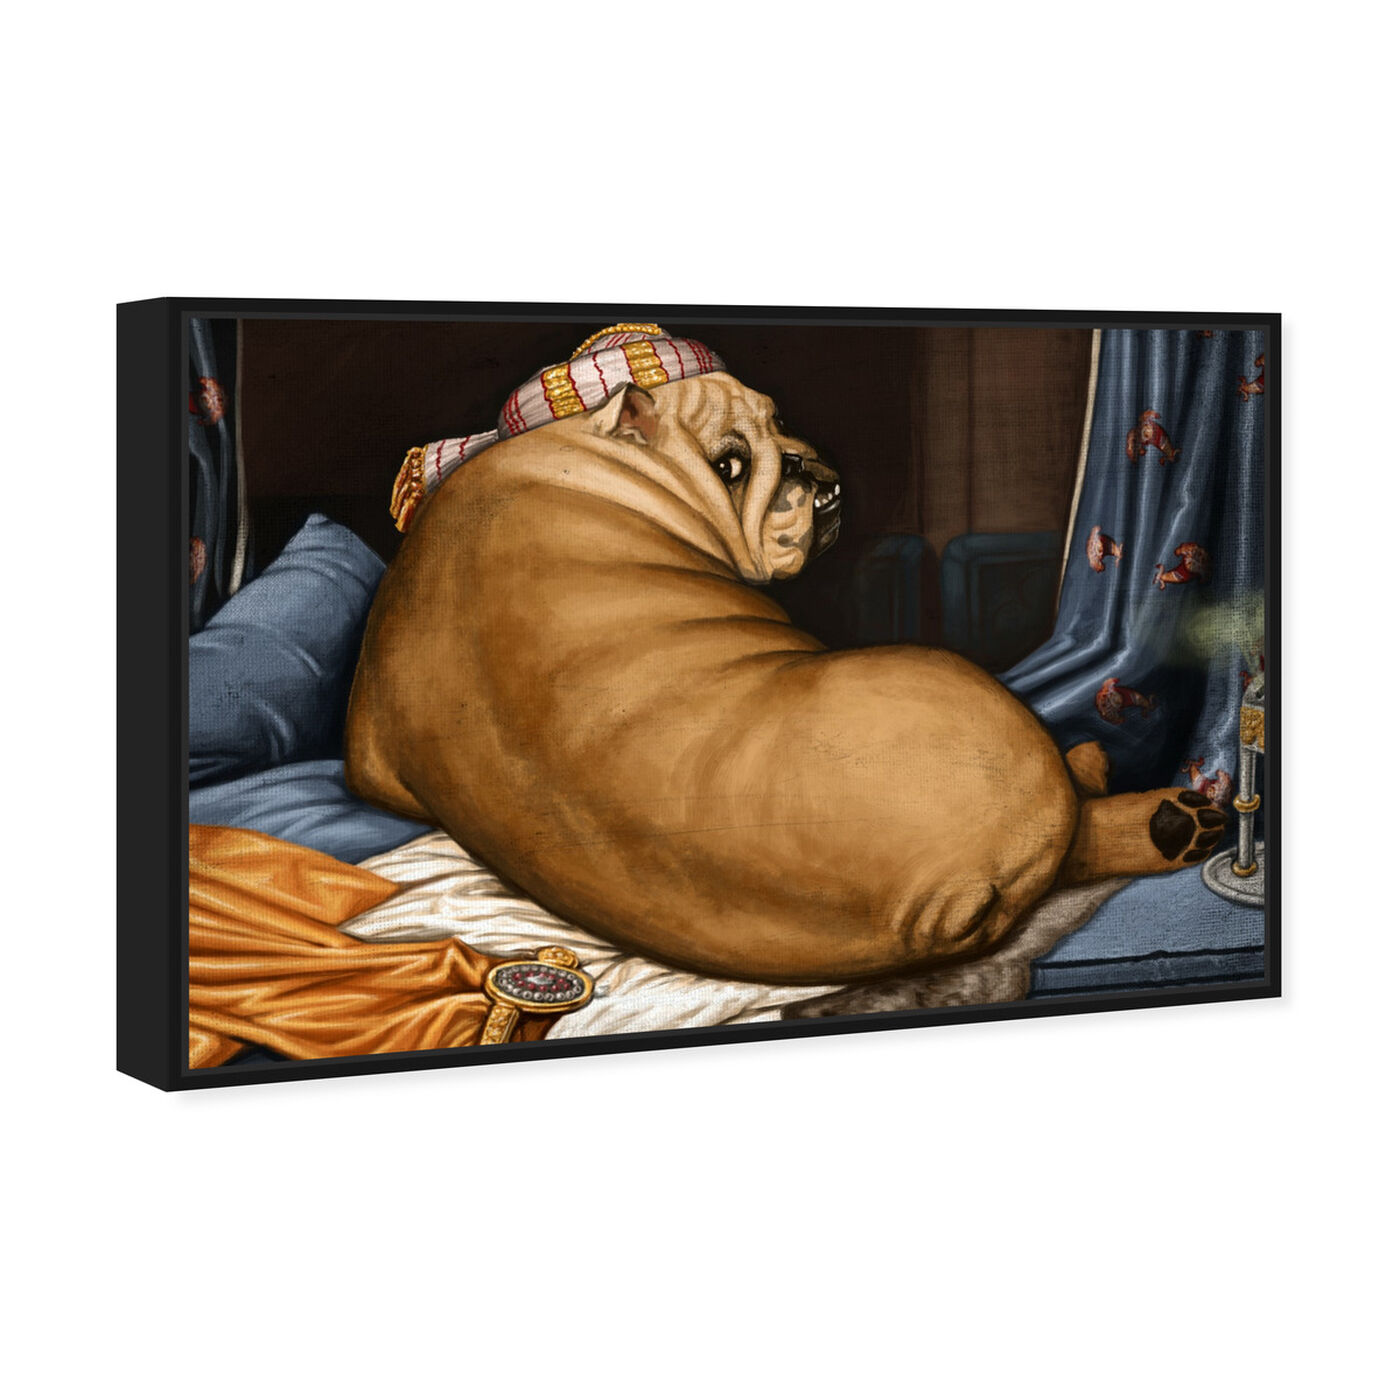 Angled view of Grande Bulldog-alisque By Carson Kressley featuring classic and figurative and classic art.